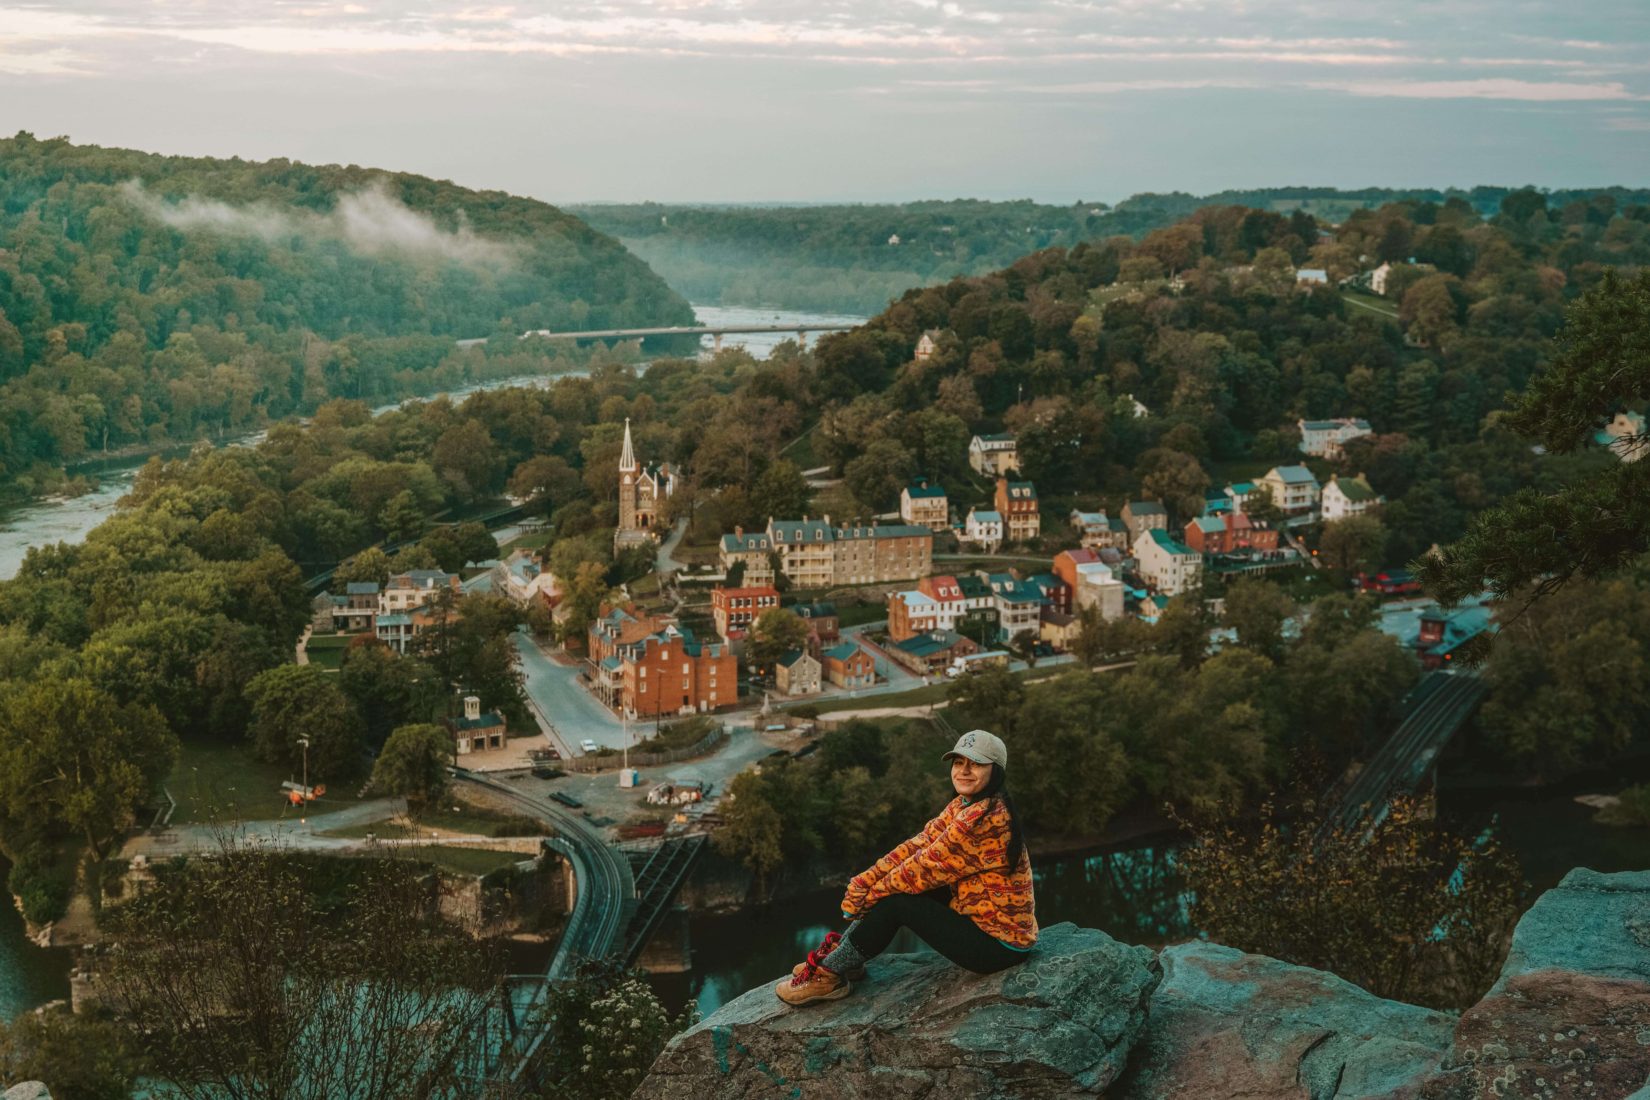 Woman sitting at overlook with downtown Harpers Ferry in the background